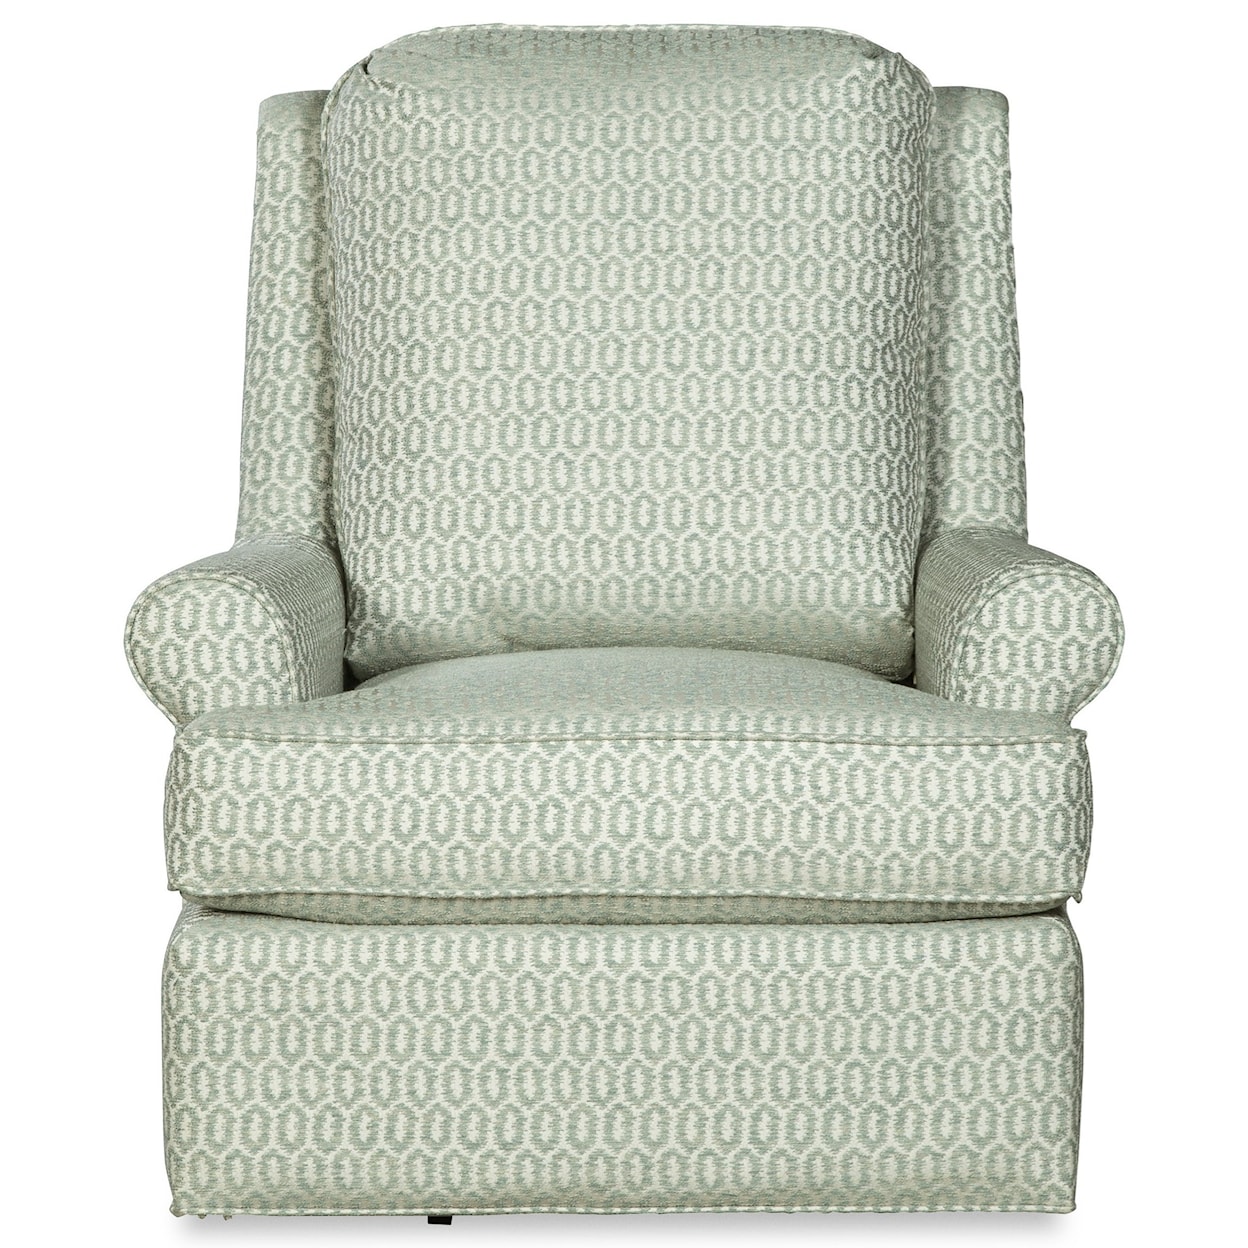 PD Cottage by Craftmaster Upholstered Chairs Swivel Chair